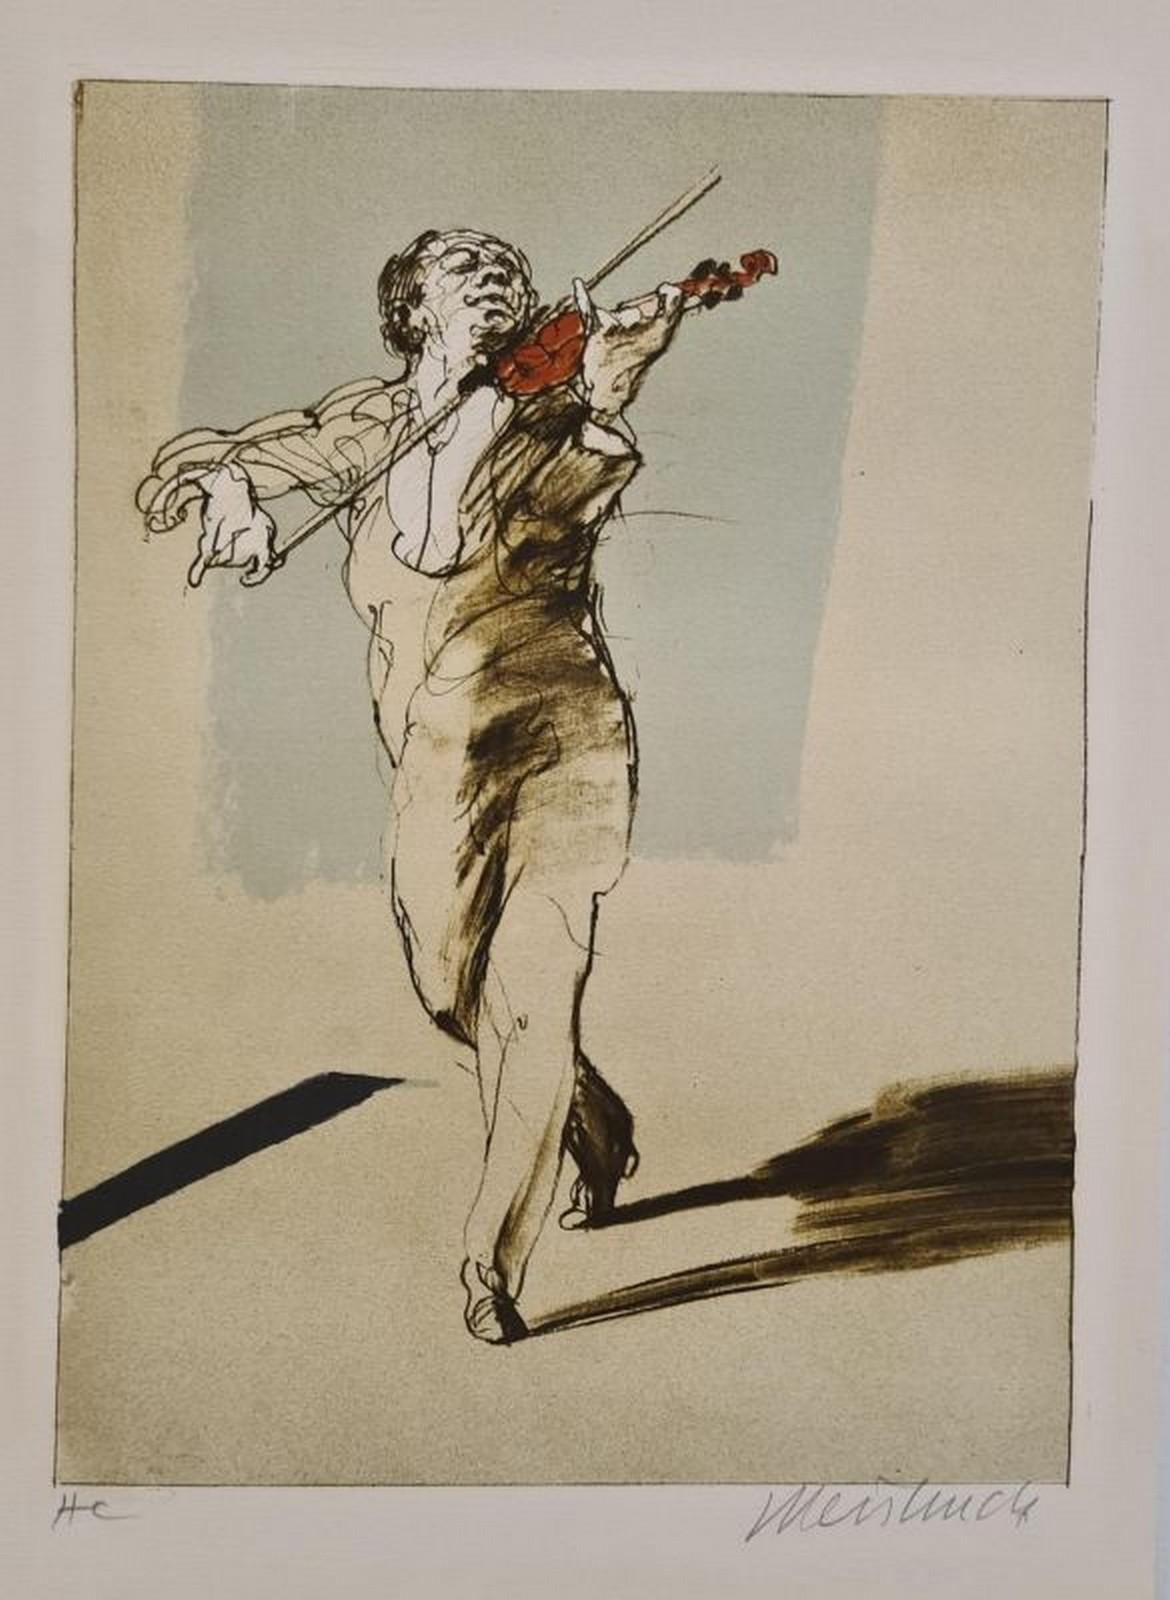 Violoniste  - Print by Claude Weisbuch